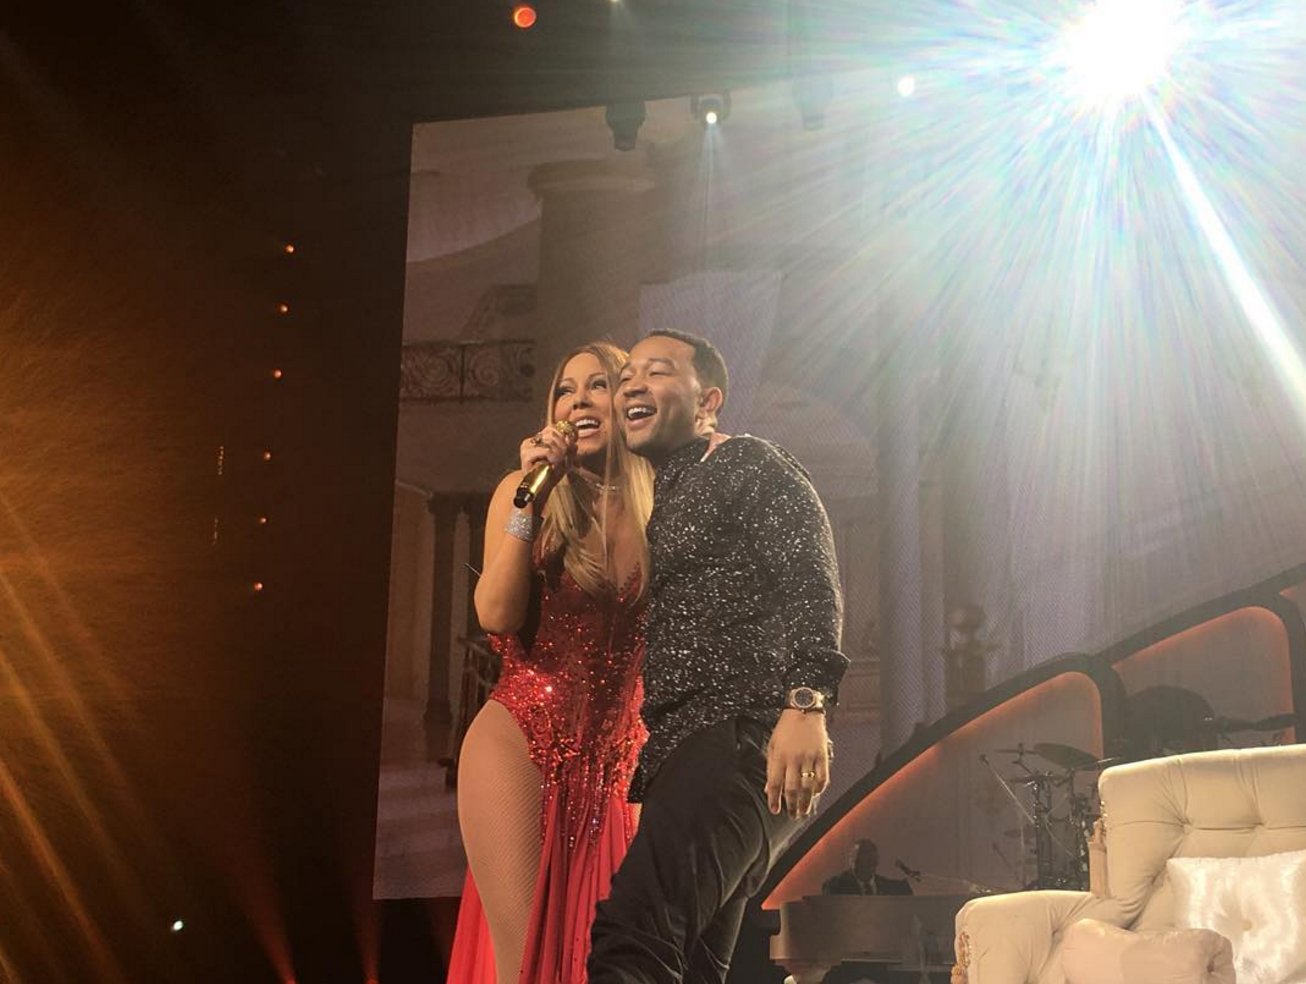 Mariah Carey on Twitter: "We love you @johnlegend and ...